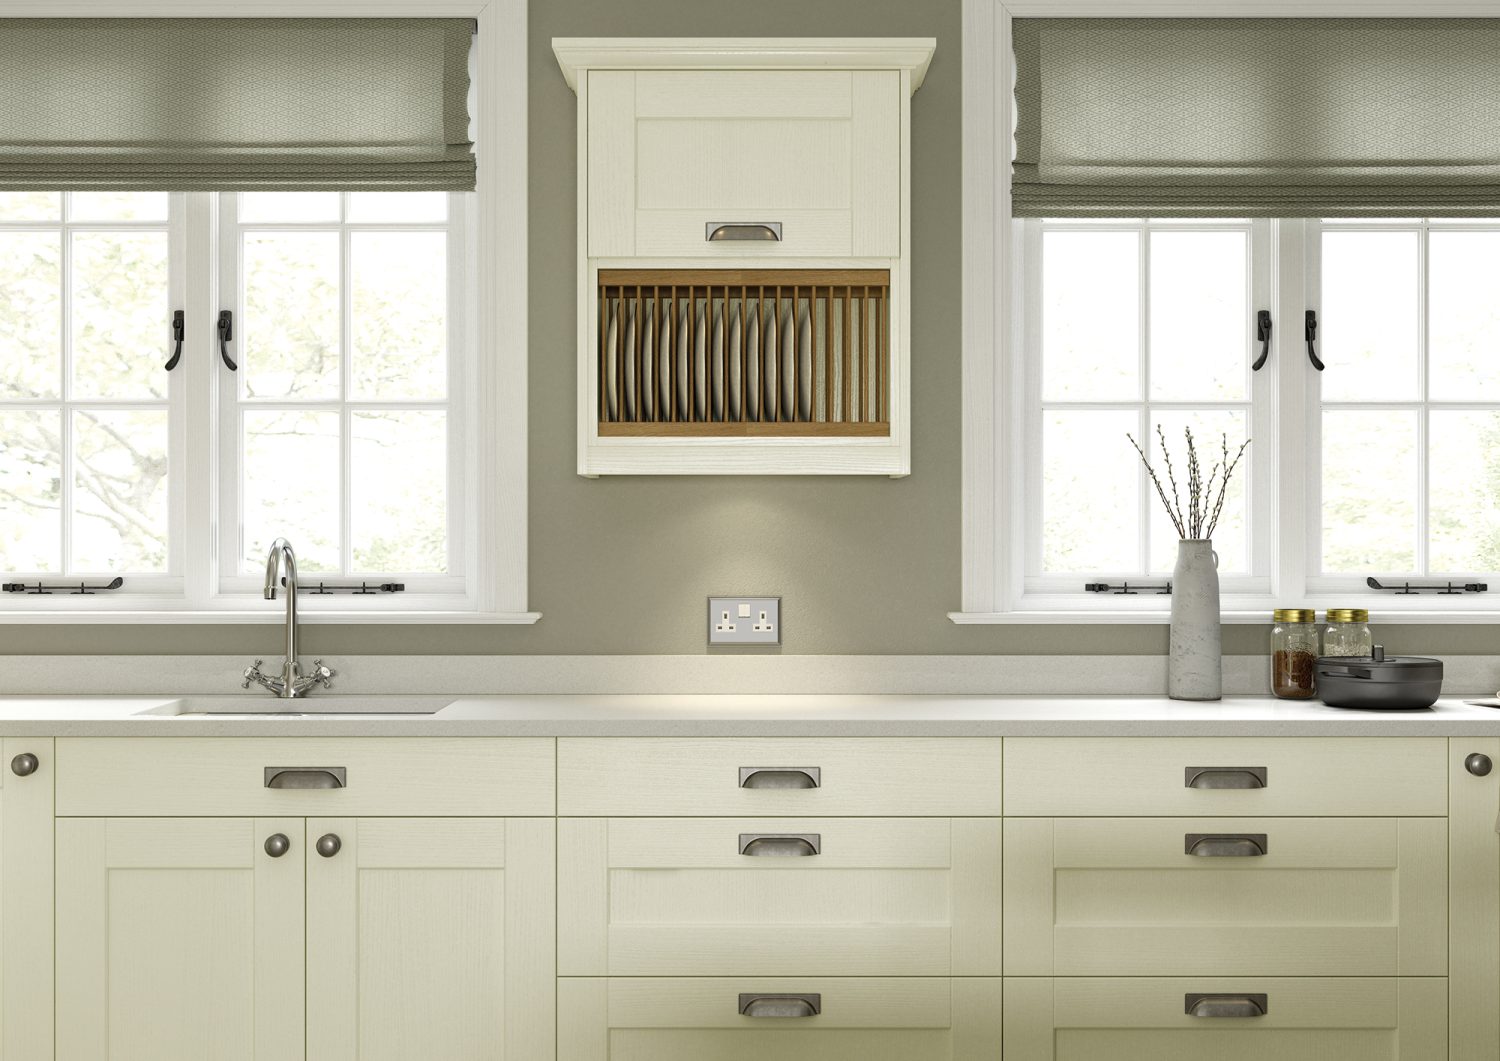 Run of Kendal Ivory shaker kitchen cabinets and drawers, made by The Kitchen Depot